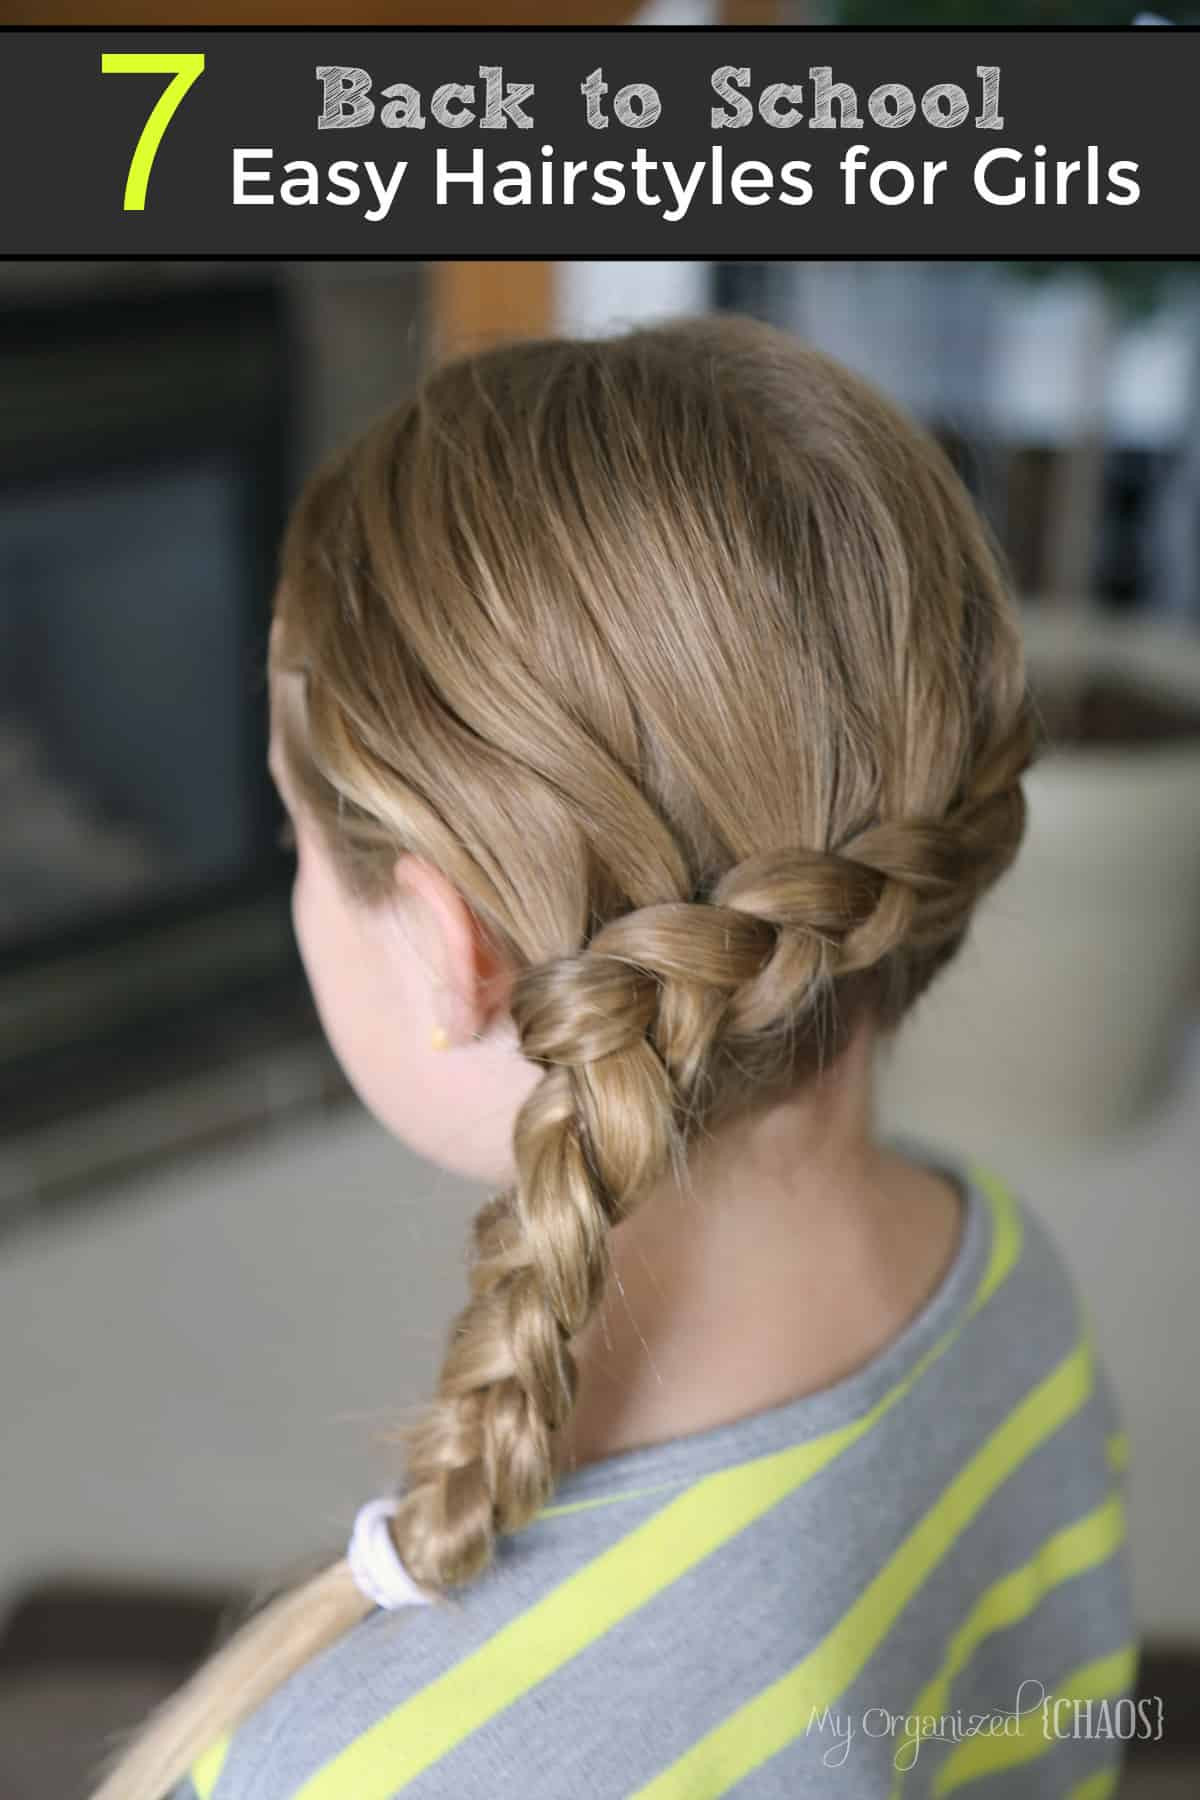 Back To School Hairstyles
 7 Back to School Easy Hairstyles for Girls